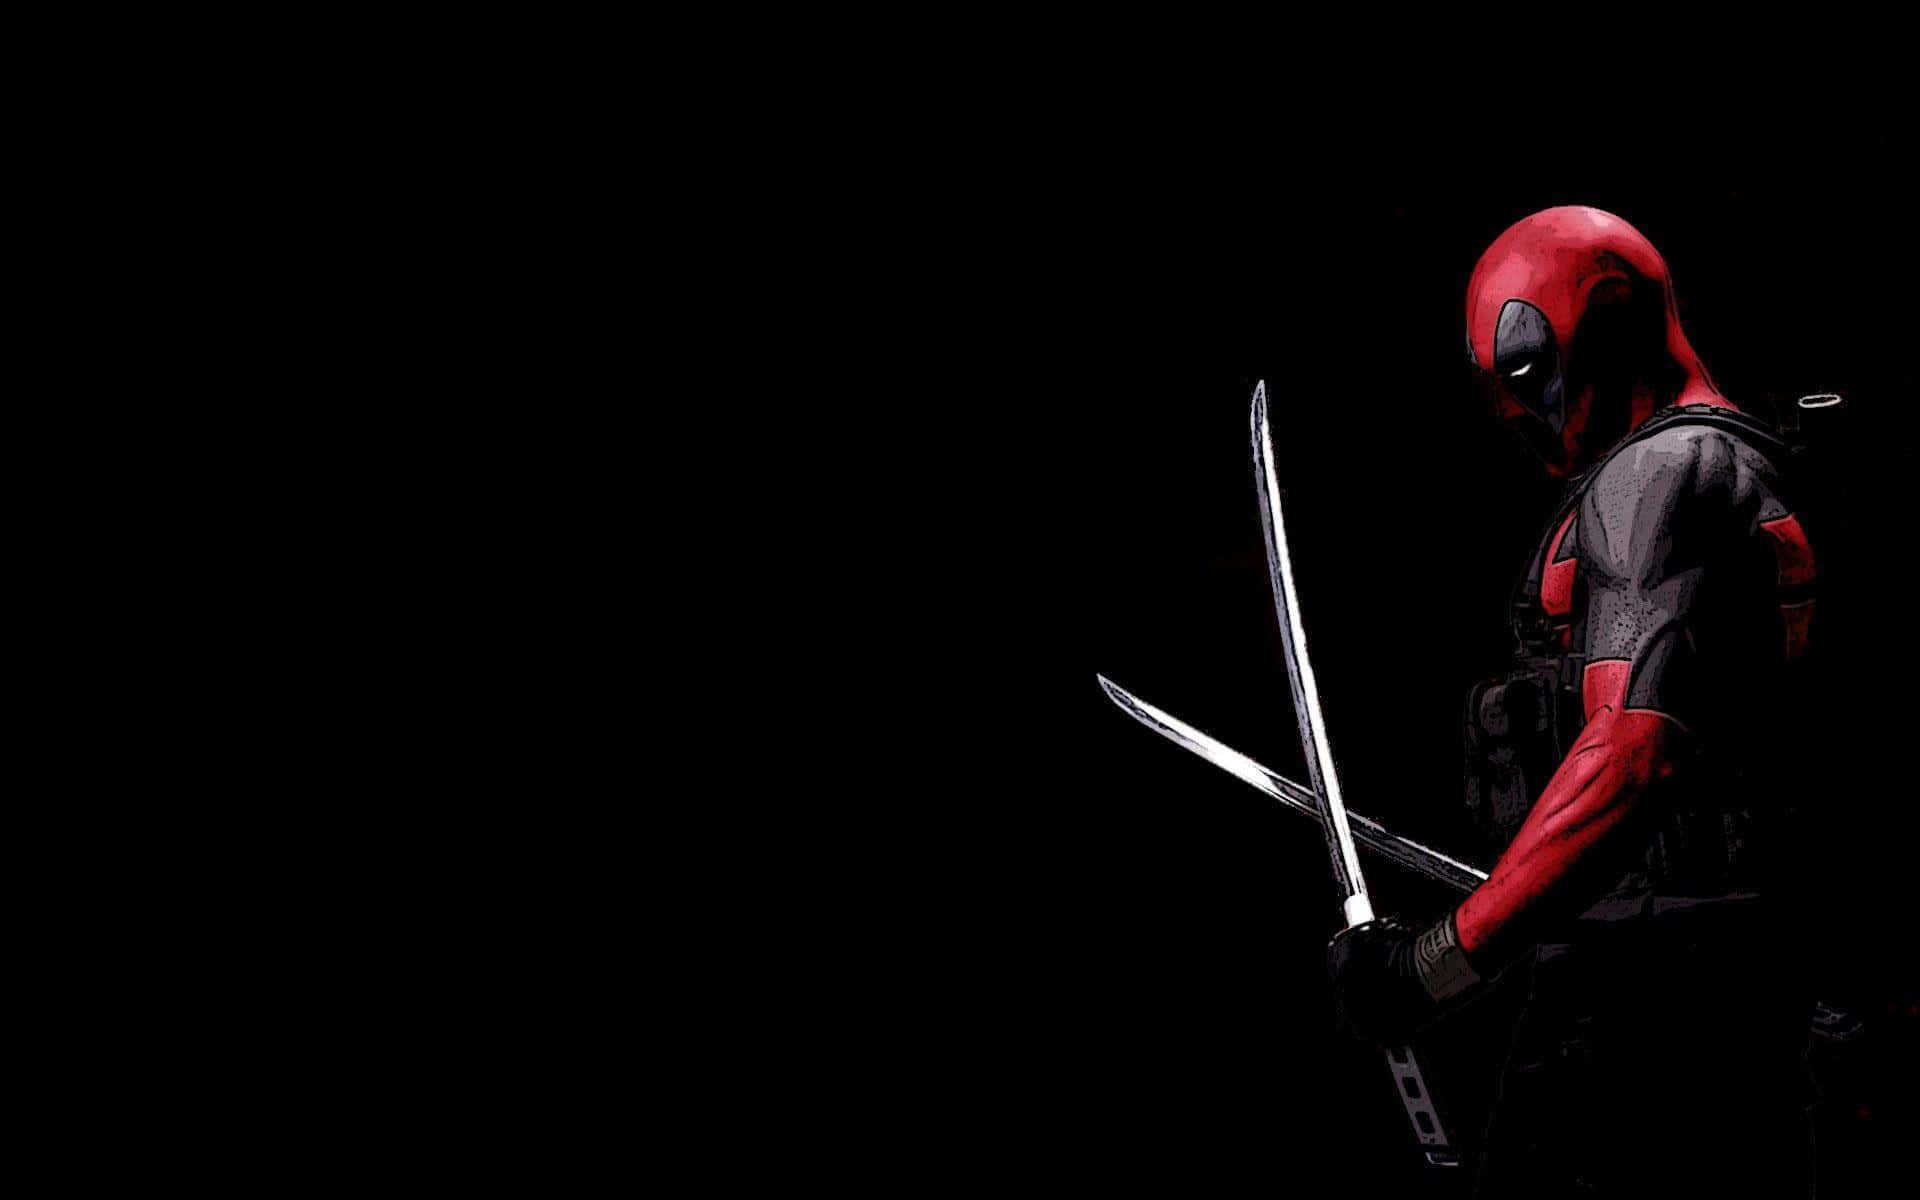 Black Deadpool takes back the night in this powerful superhero image Wallpaper